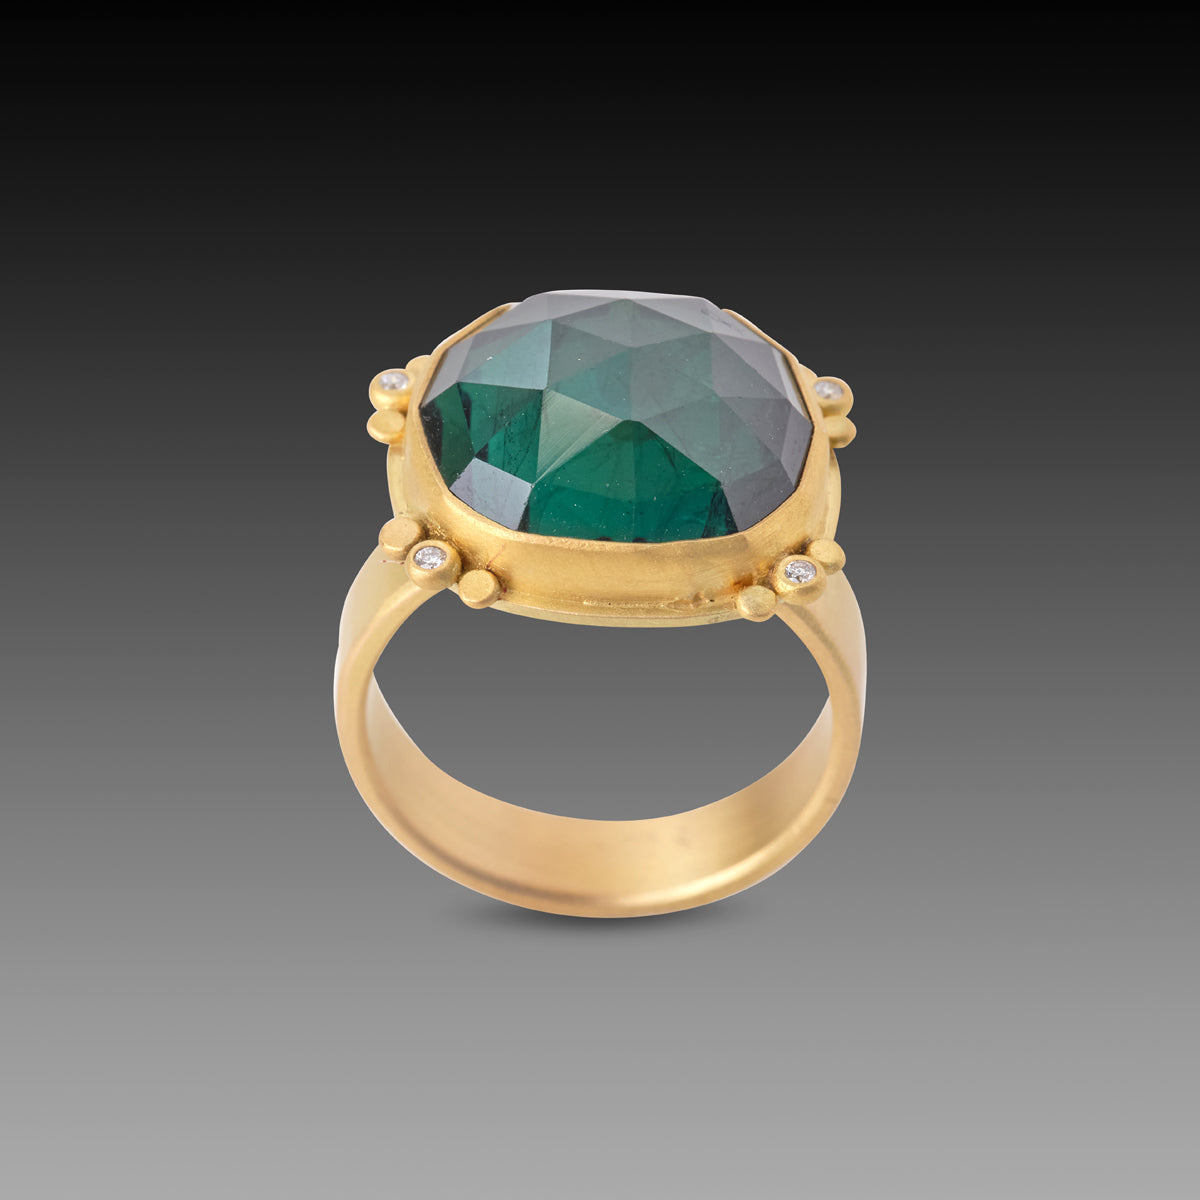 Emerald Ring 4.04 Ct. 18K Yellow Gold | The Natural Emerald Company